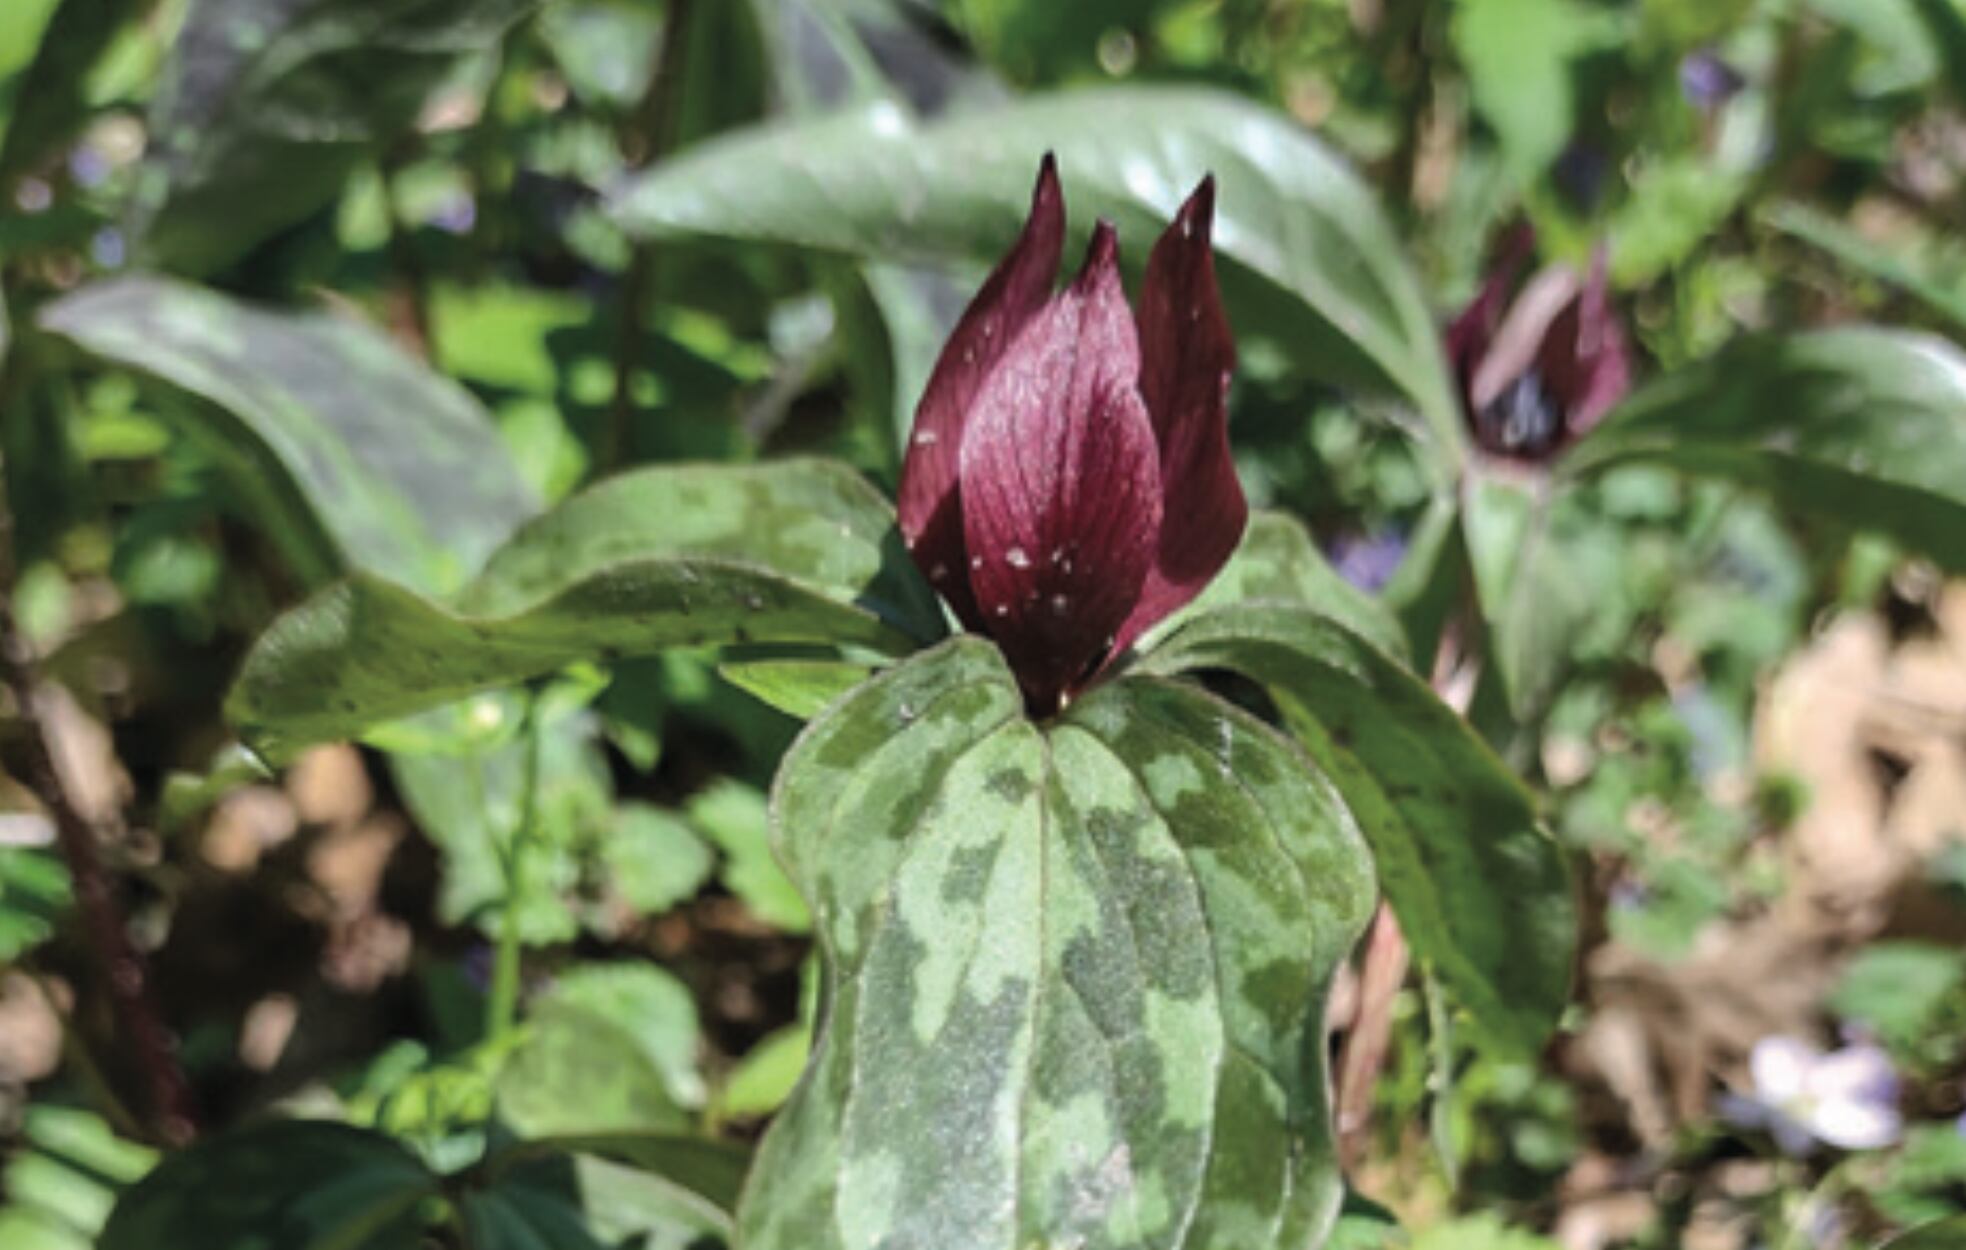 PRAIRIE TRILLIUM
Three-petal flower. Early settlers called it the bloody nose because that’s what it resembles. Blooms about two weeks. April into May.